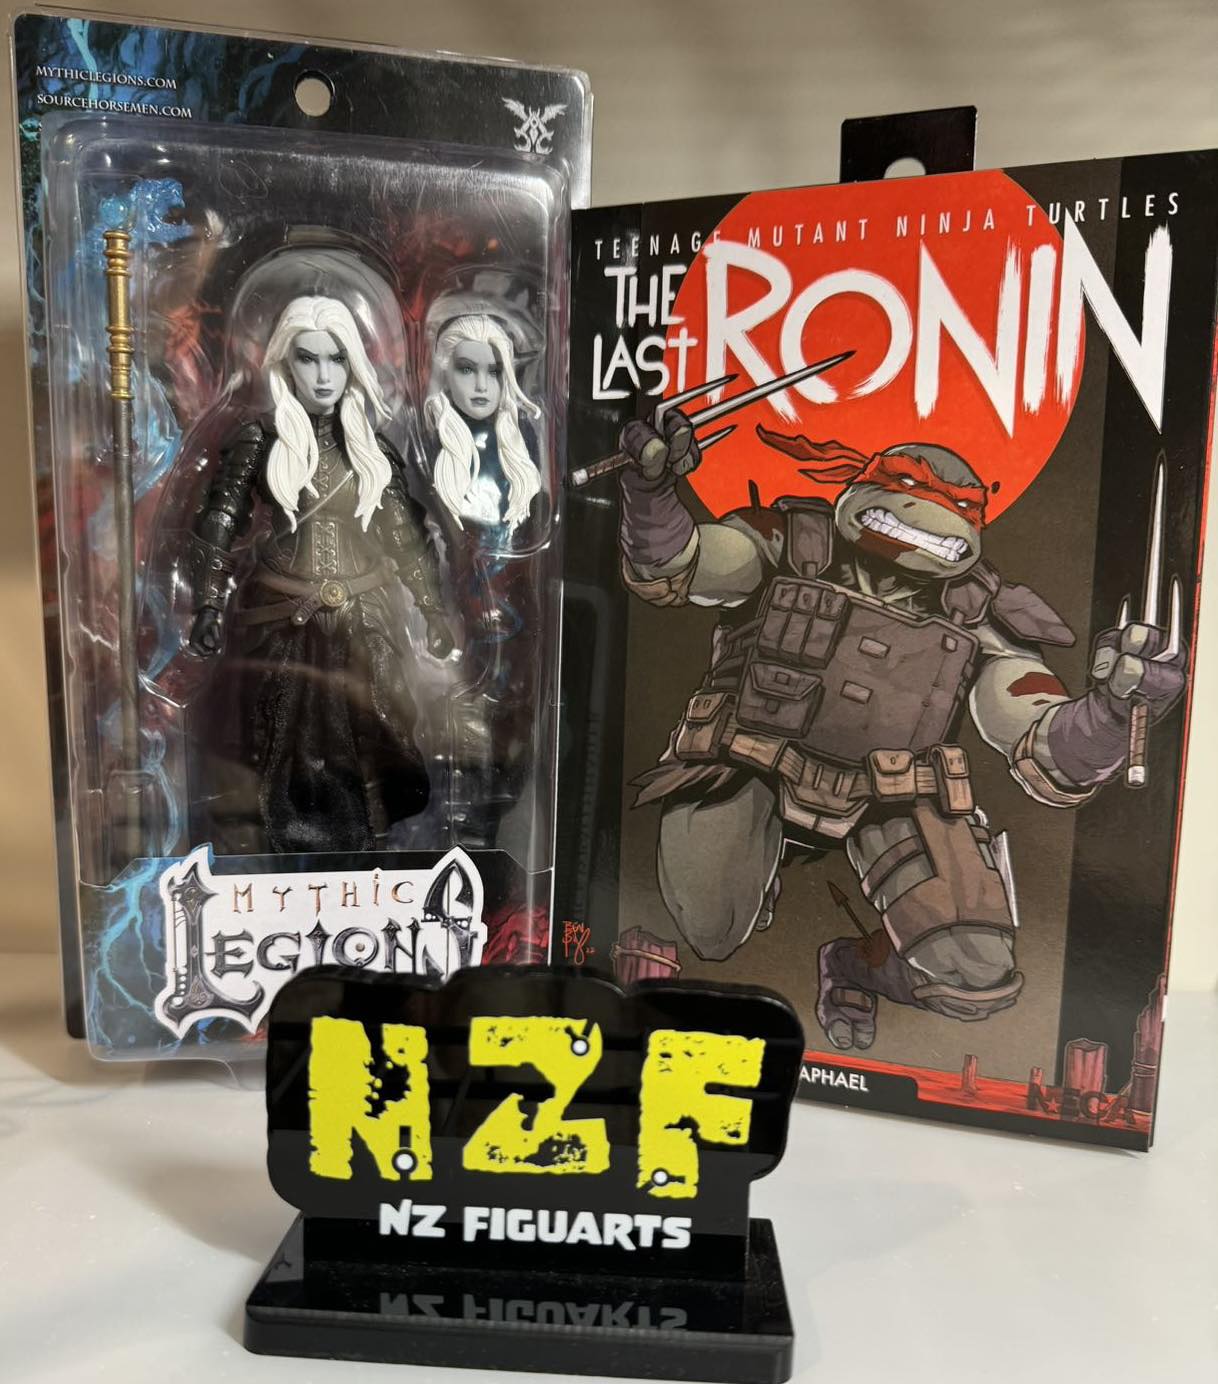 (Prize Draw) 10 Numbers @ $20 each for Mythic legions Thraice Wraithhailer and Neca Raphael